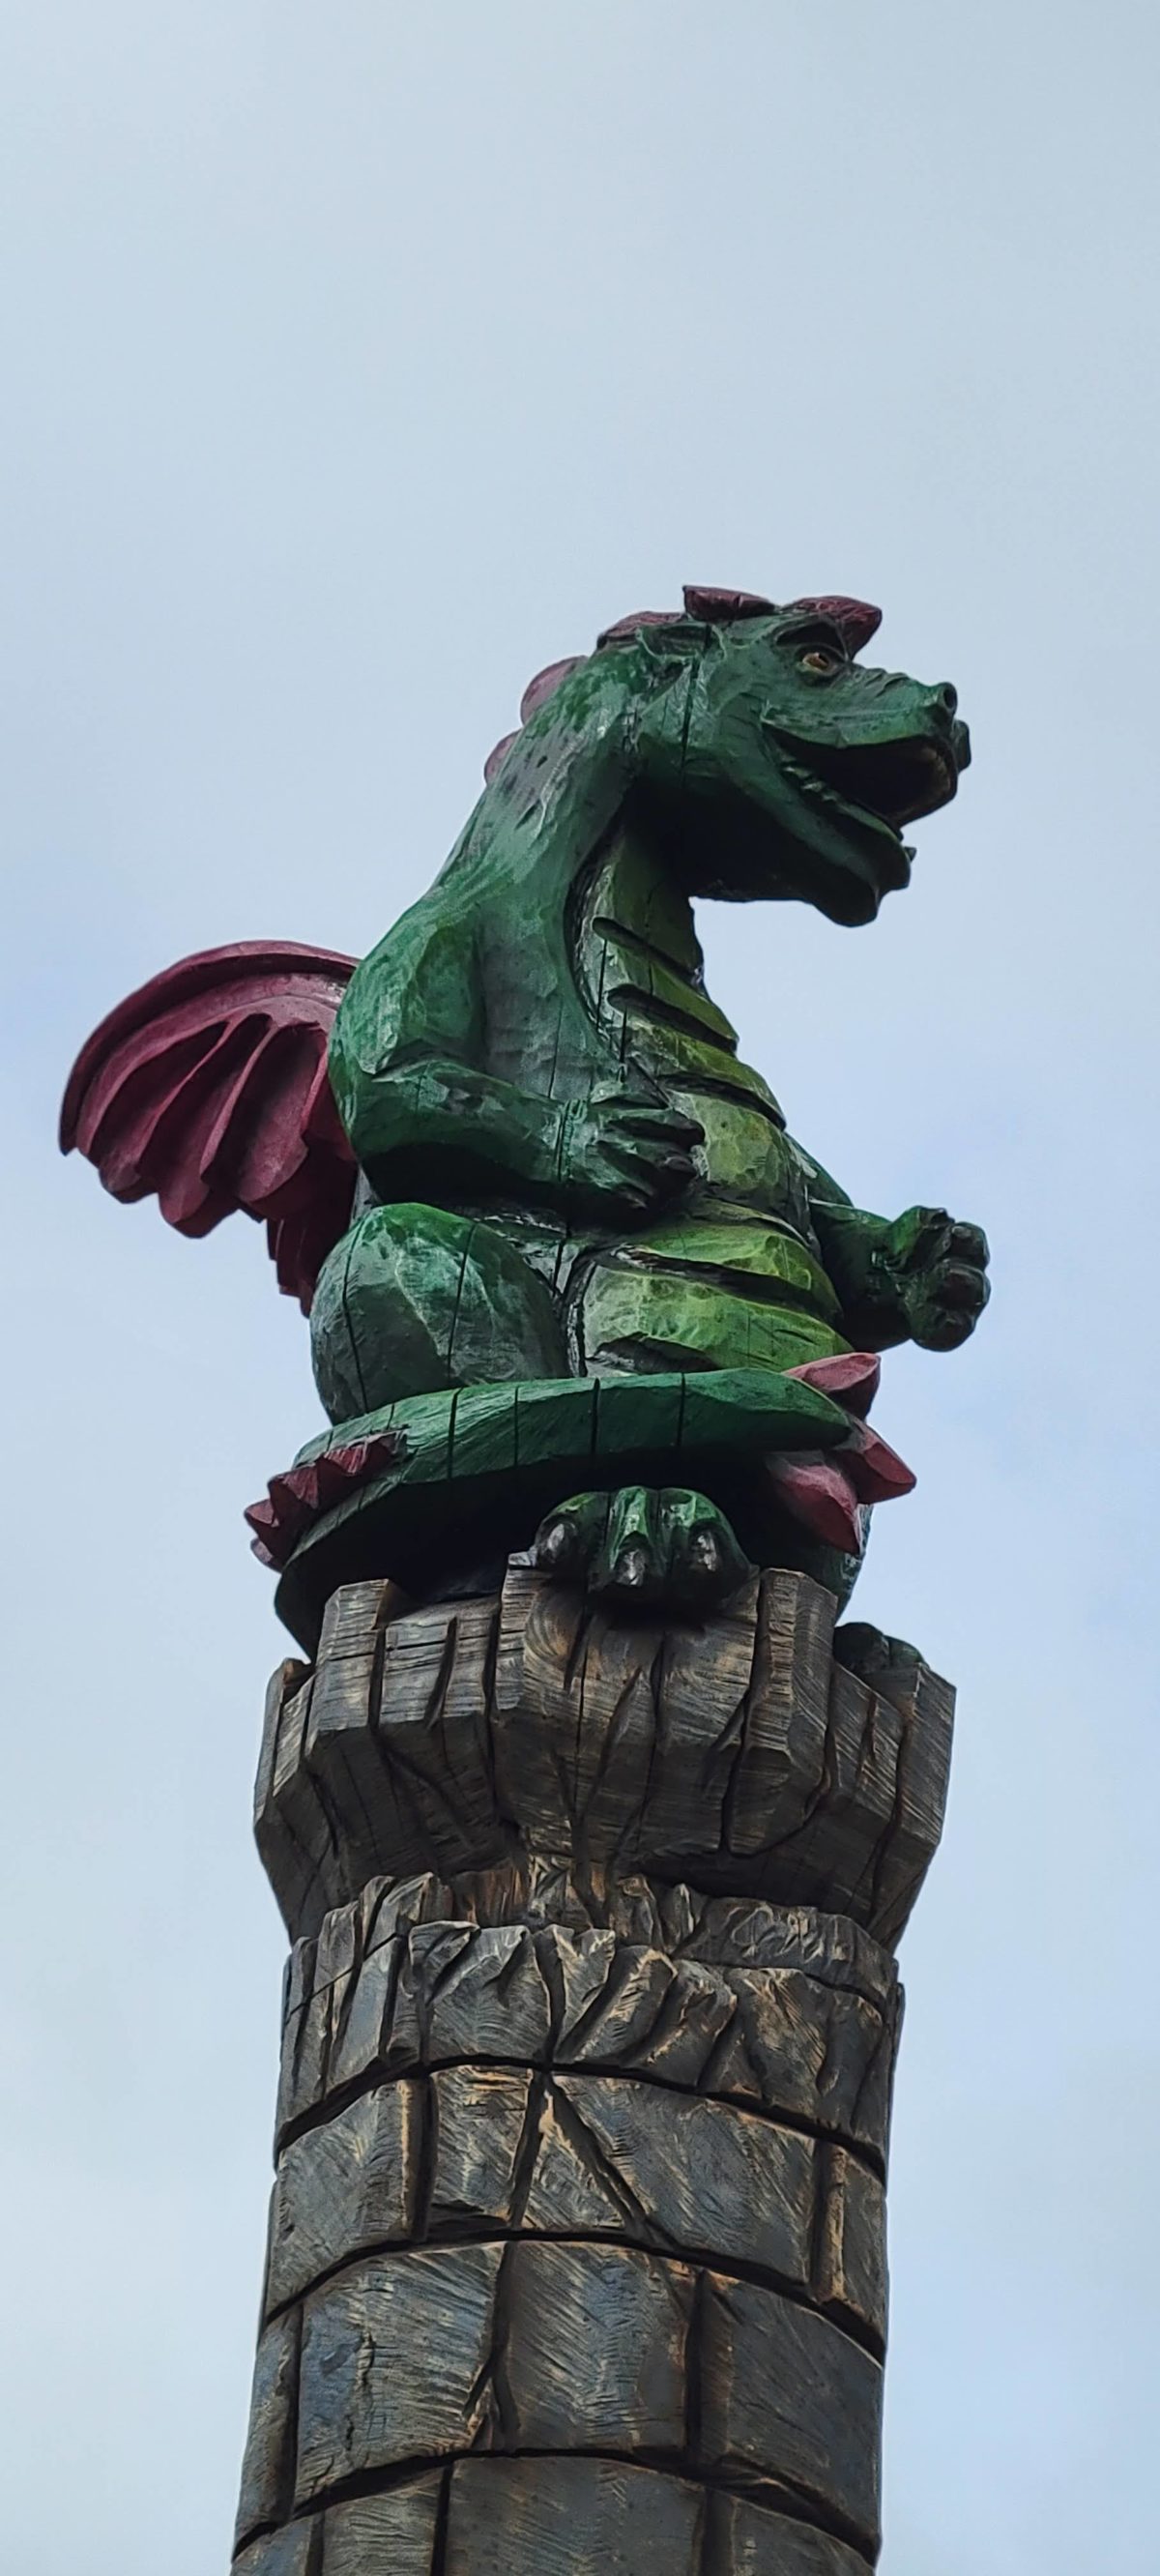 Top of the tower, dragon close-up